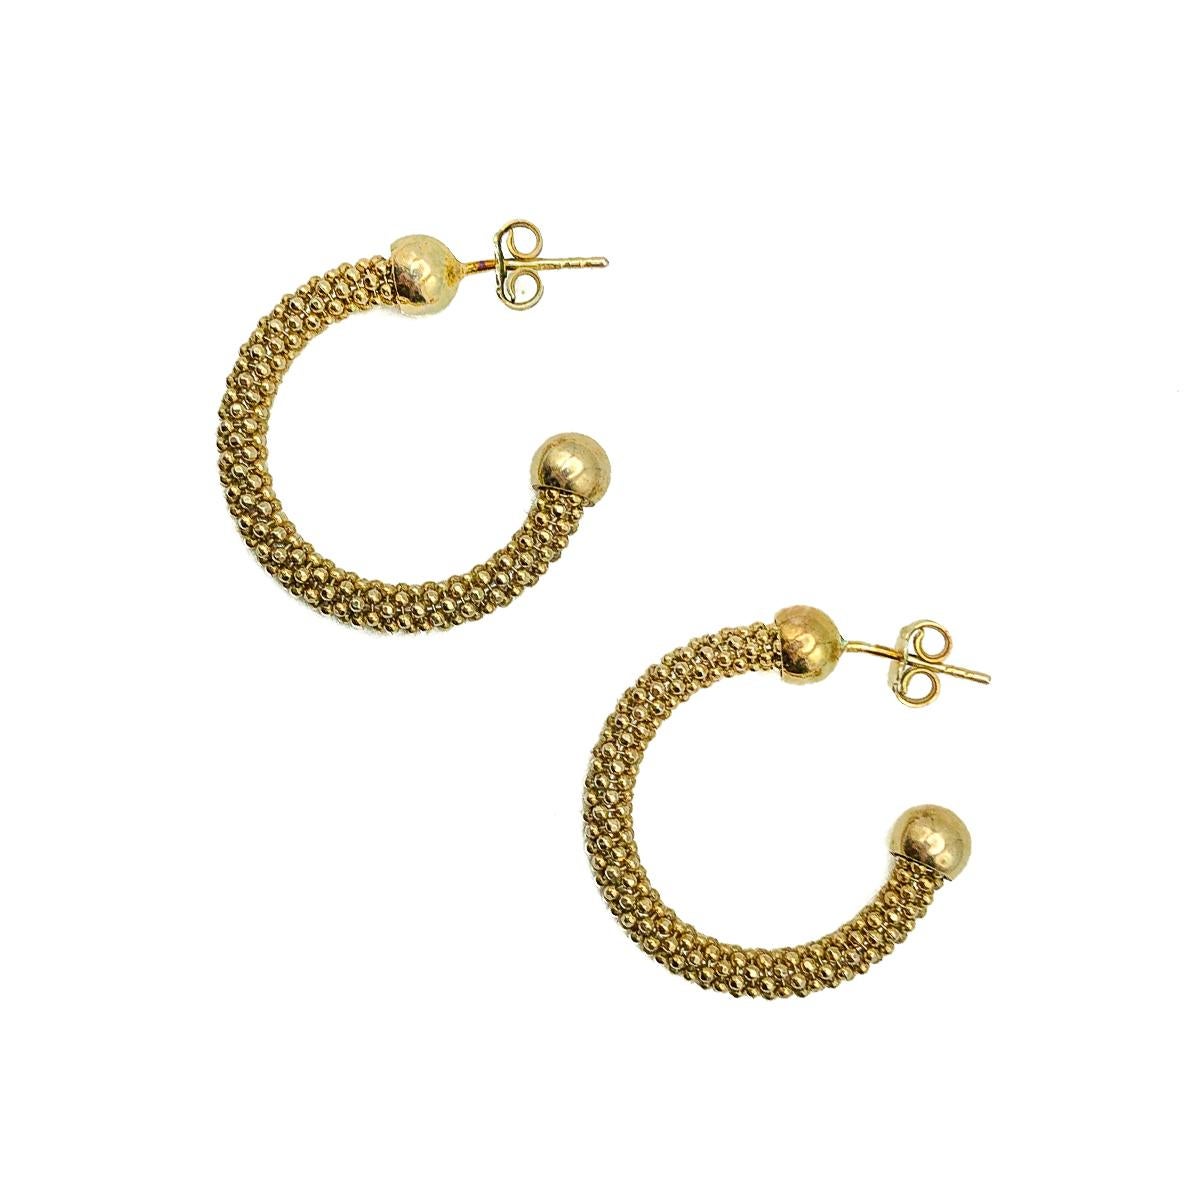 Vintage Silver Vermeil Hoop Earrings. Crafted in 925 sterling silver with a gold vermeil wash or plate. In very good vintage condition, 2.75 cms drop, pierced fittings. Stamped 925 on earring post and butterfly. A fab pair of vintage hoops that will